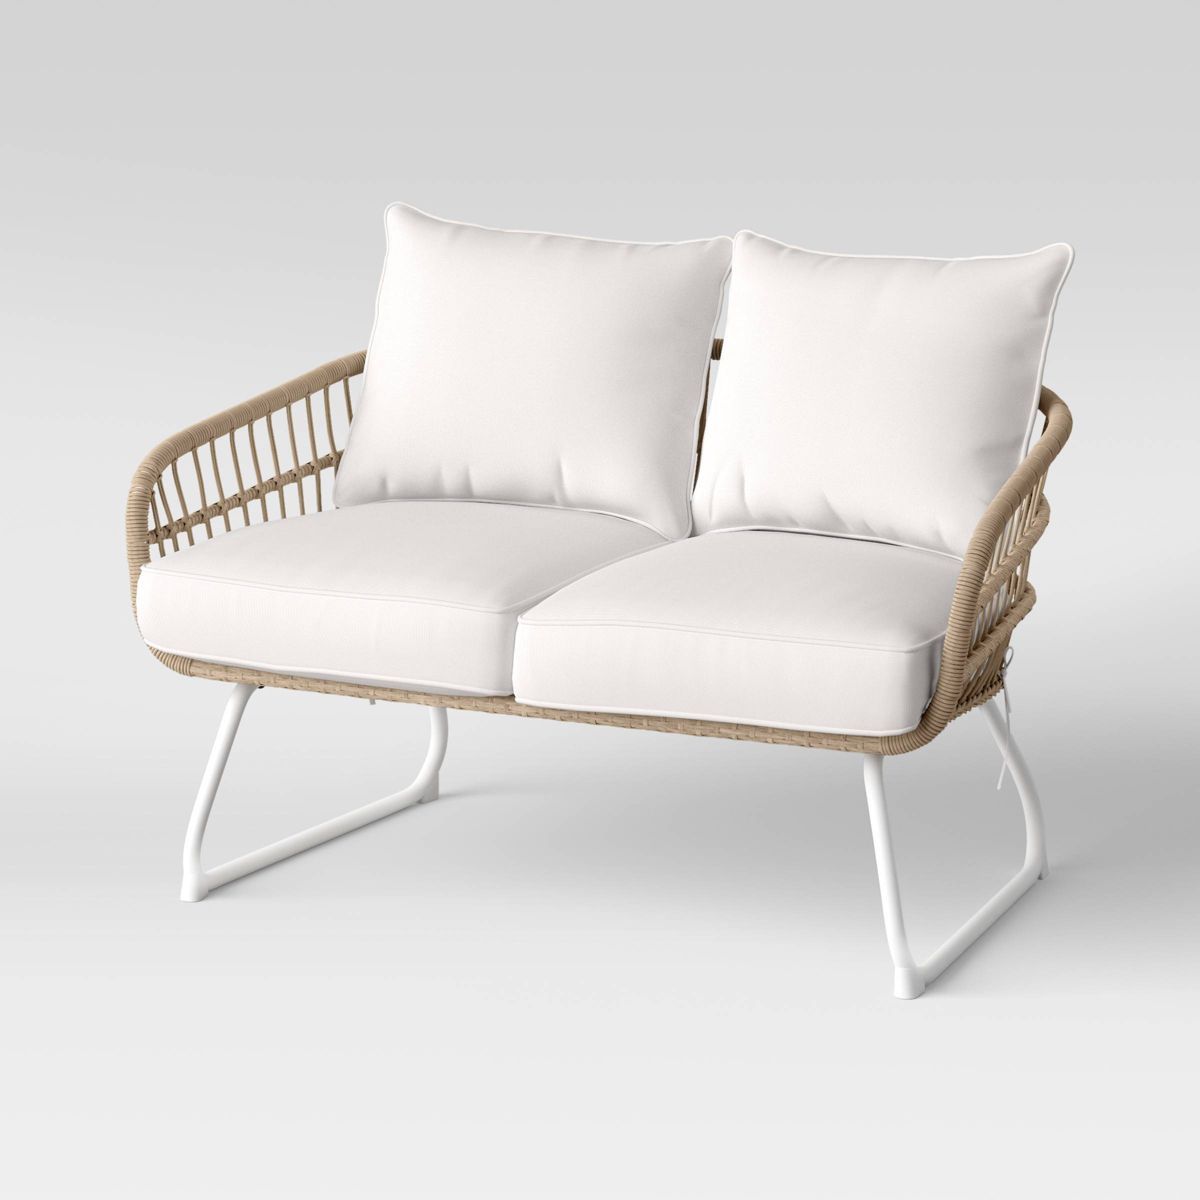 Southport Patio Loveseat with Metal Legs - Natural/White - Threshold™ | Target